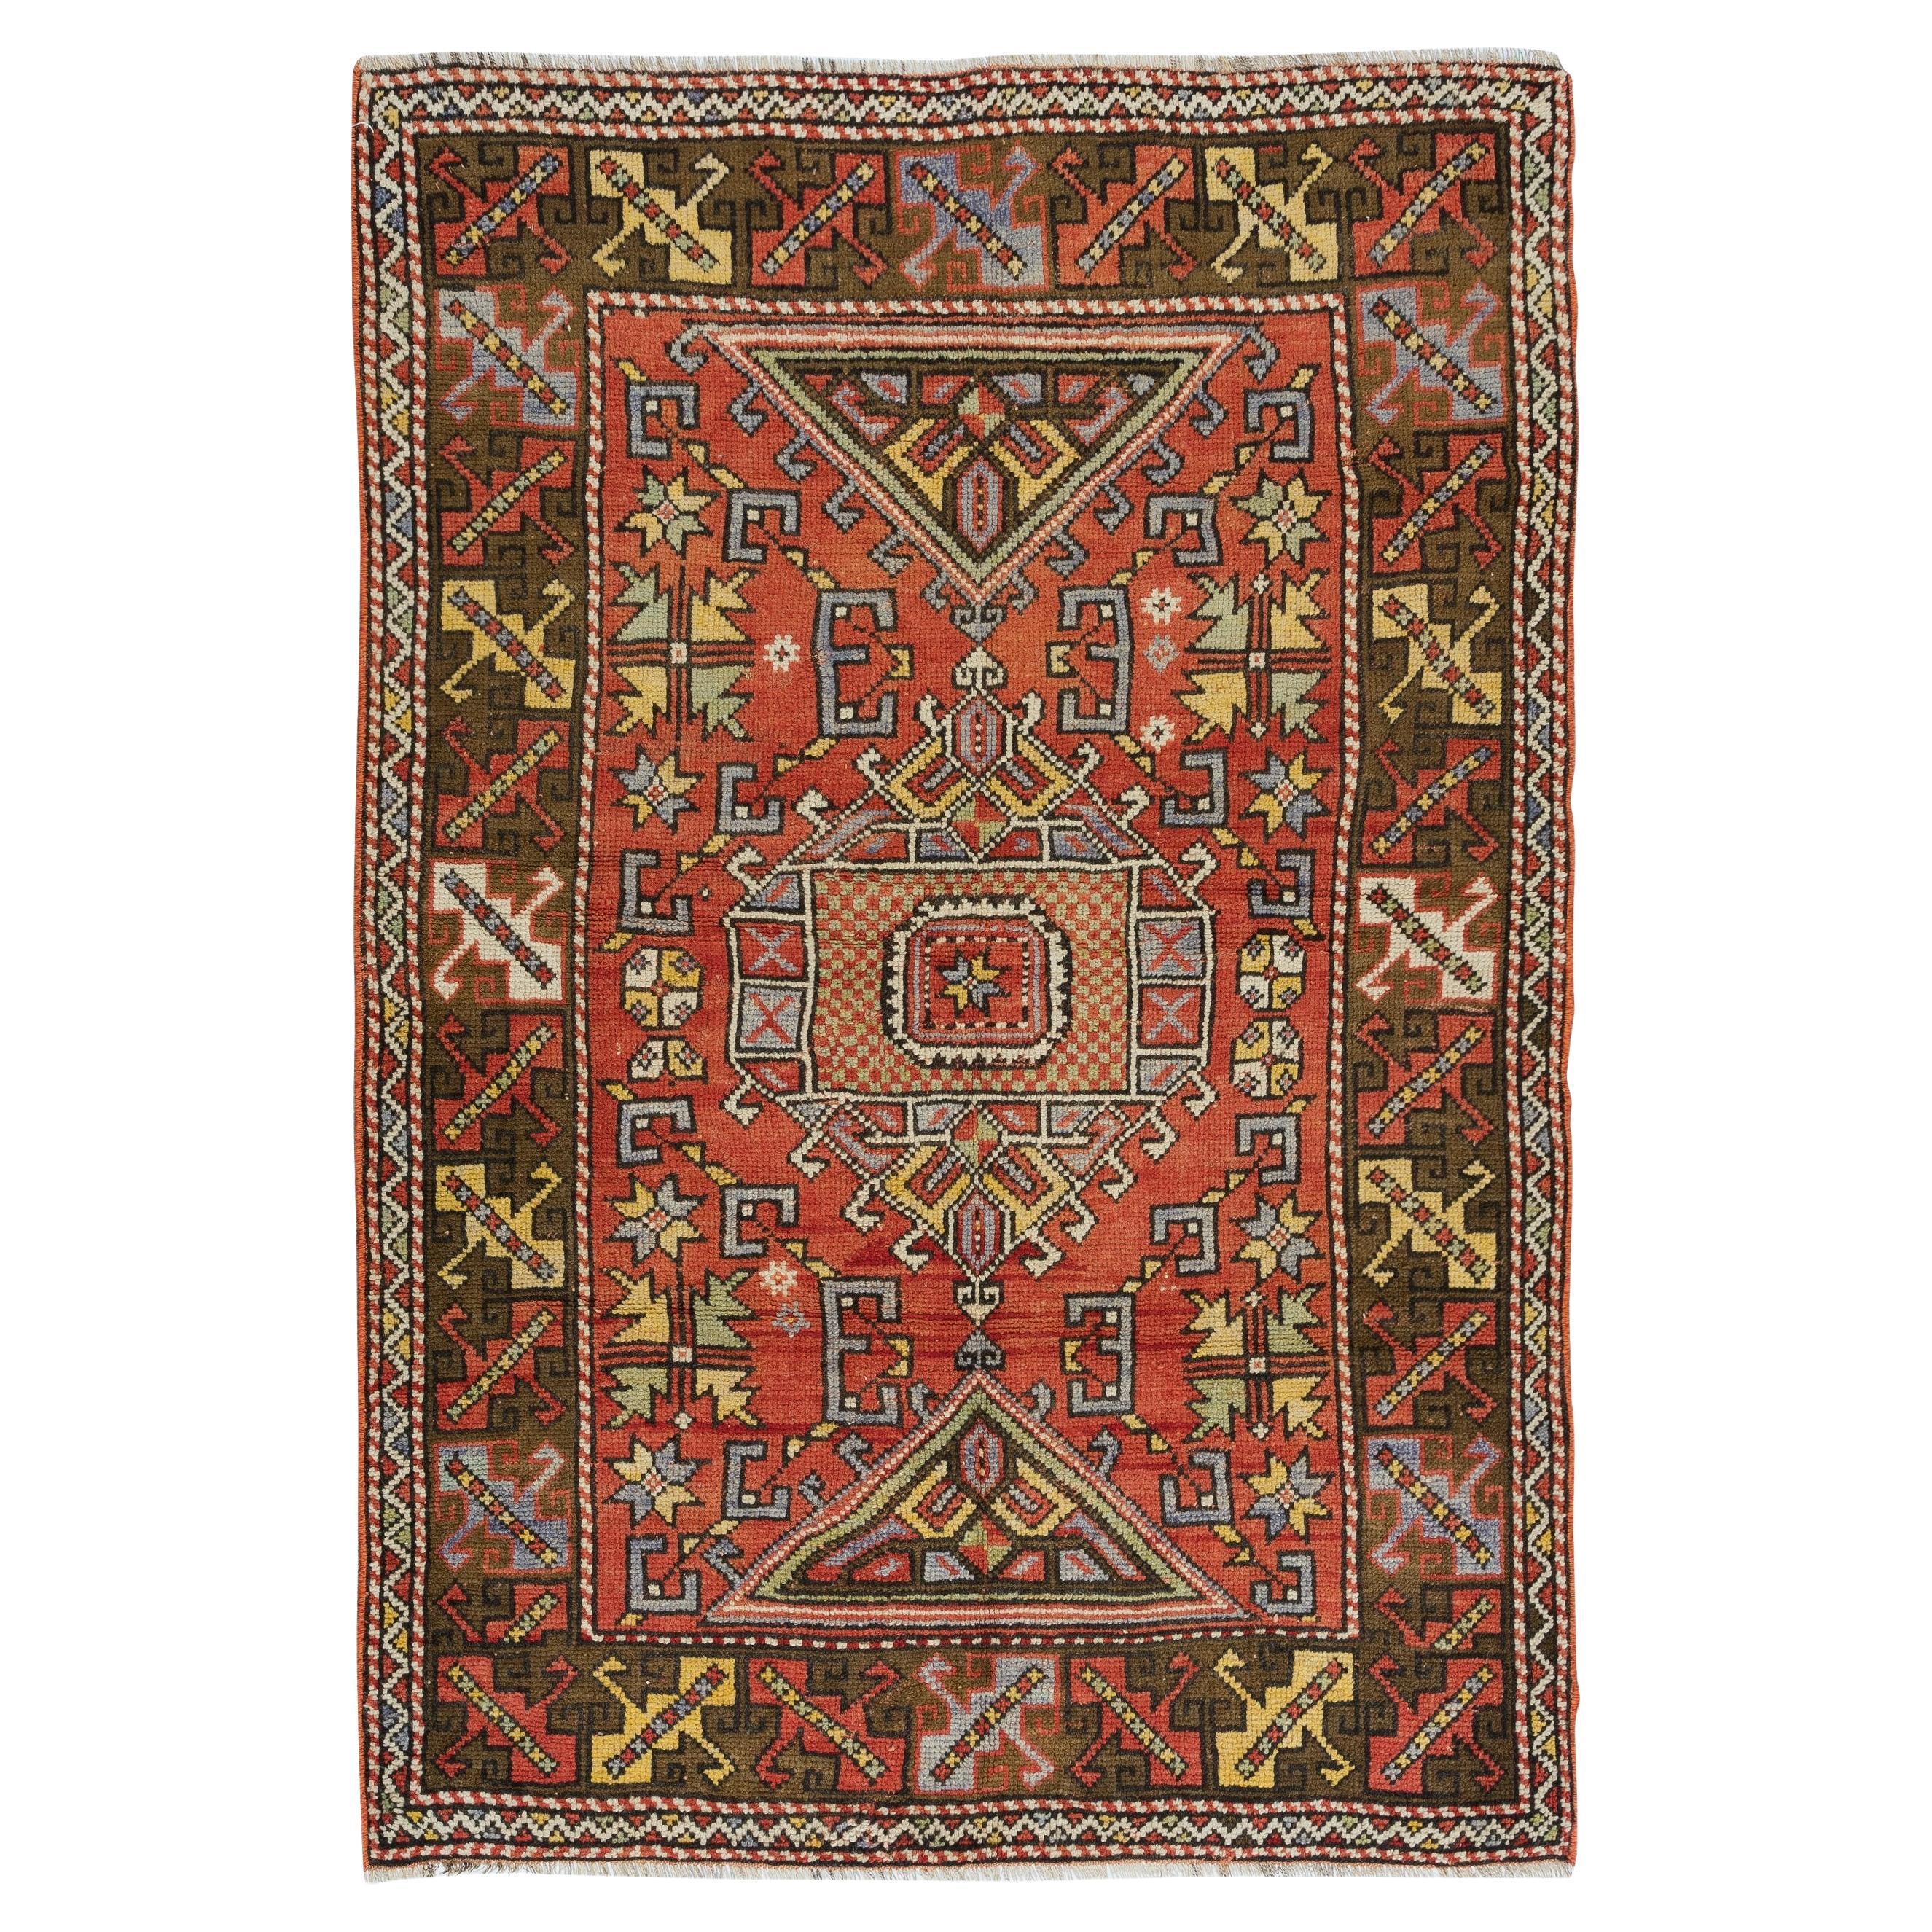 4x5.7 Ft MidCentury Handmade Turkish Traditional Wool Rug for Home, Office Decor en vente